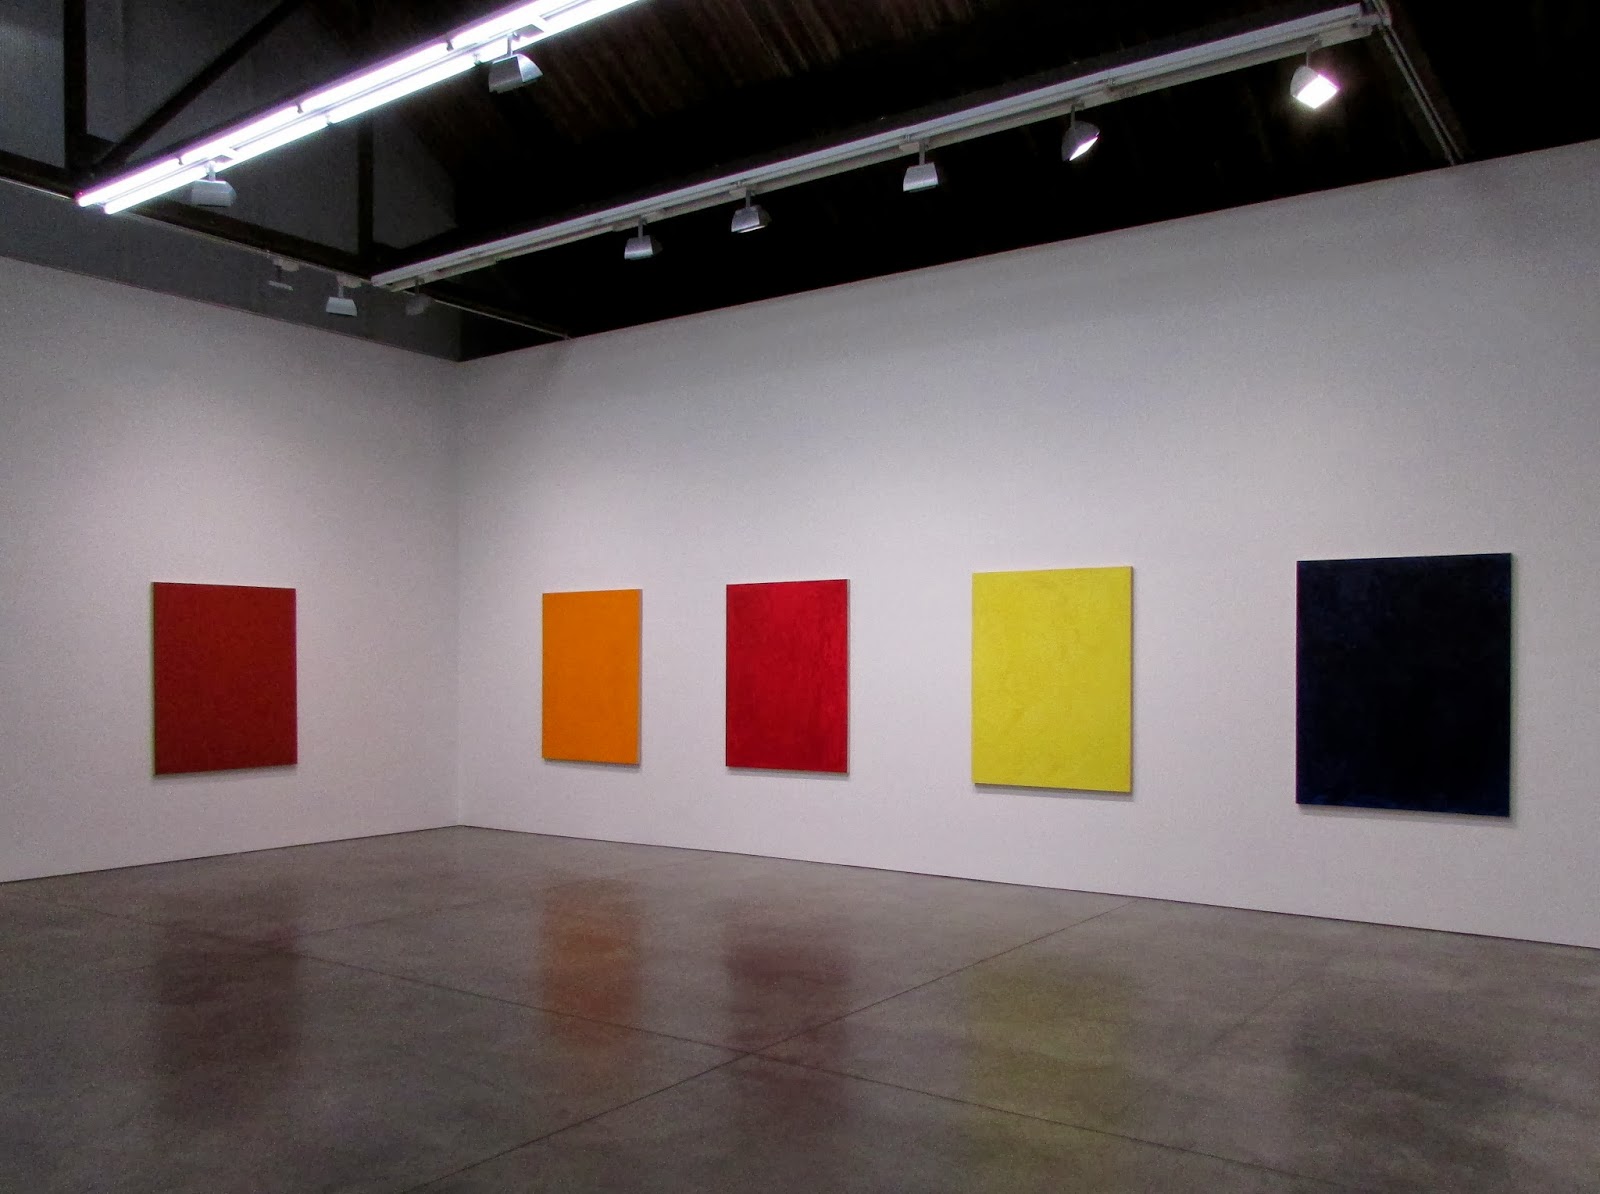 Josh Smith - Abstraction - Exhibitions - Luhring Augustine